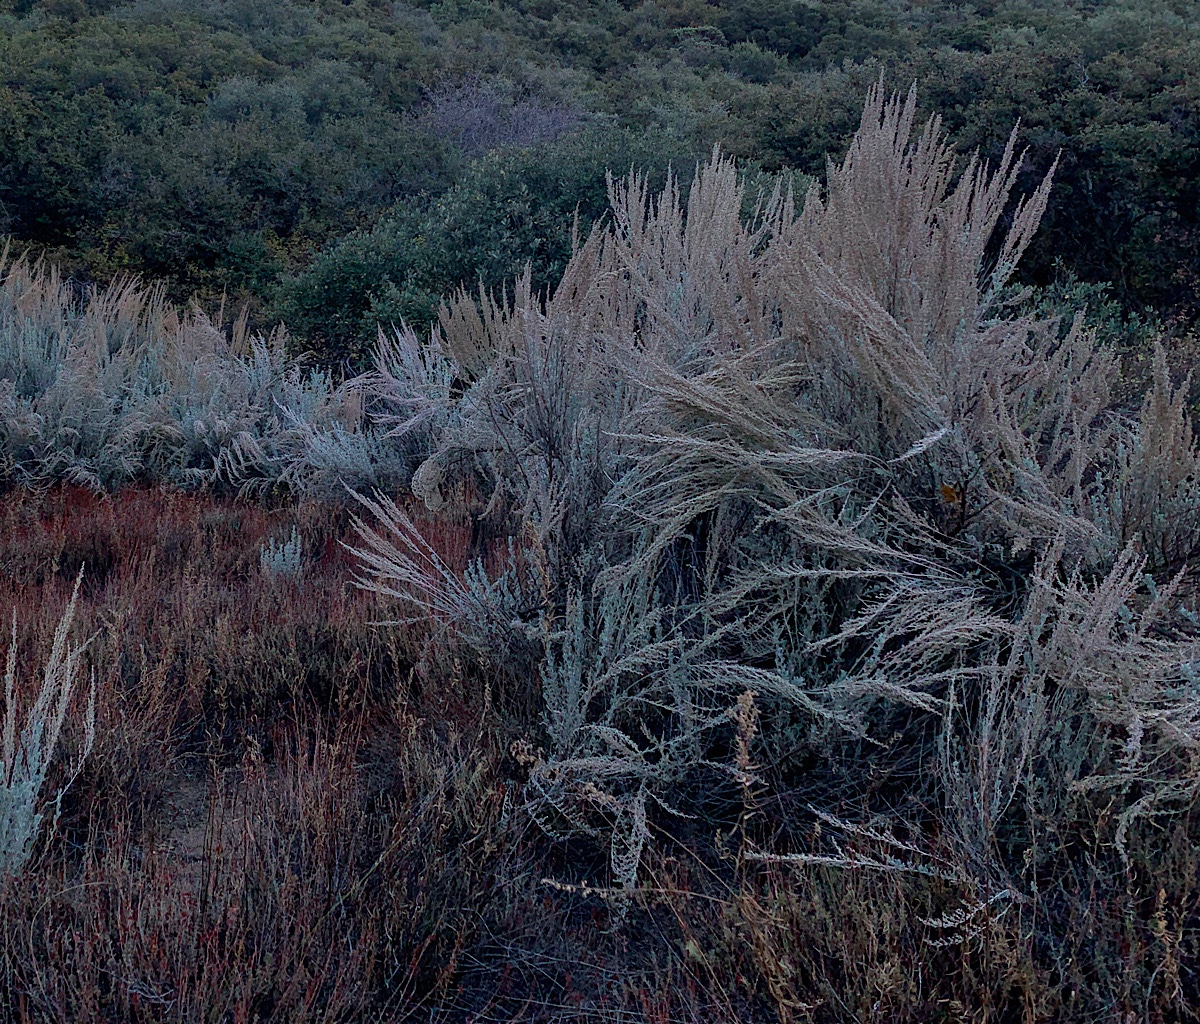 Sagebrush in enormous clumps, the branches akimbo. 